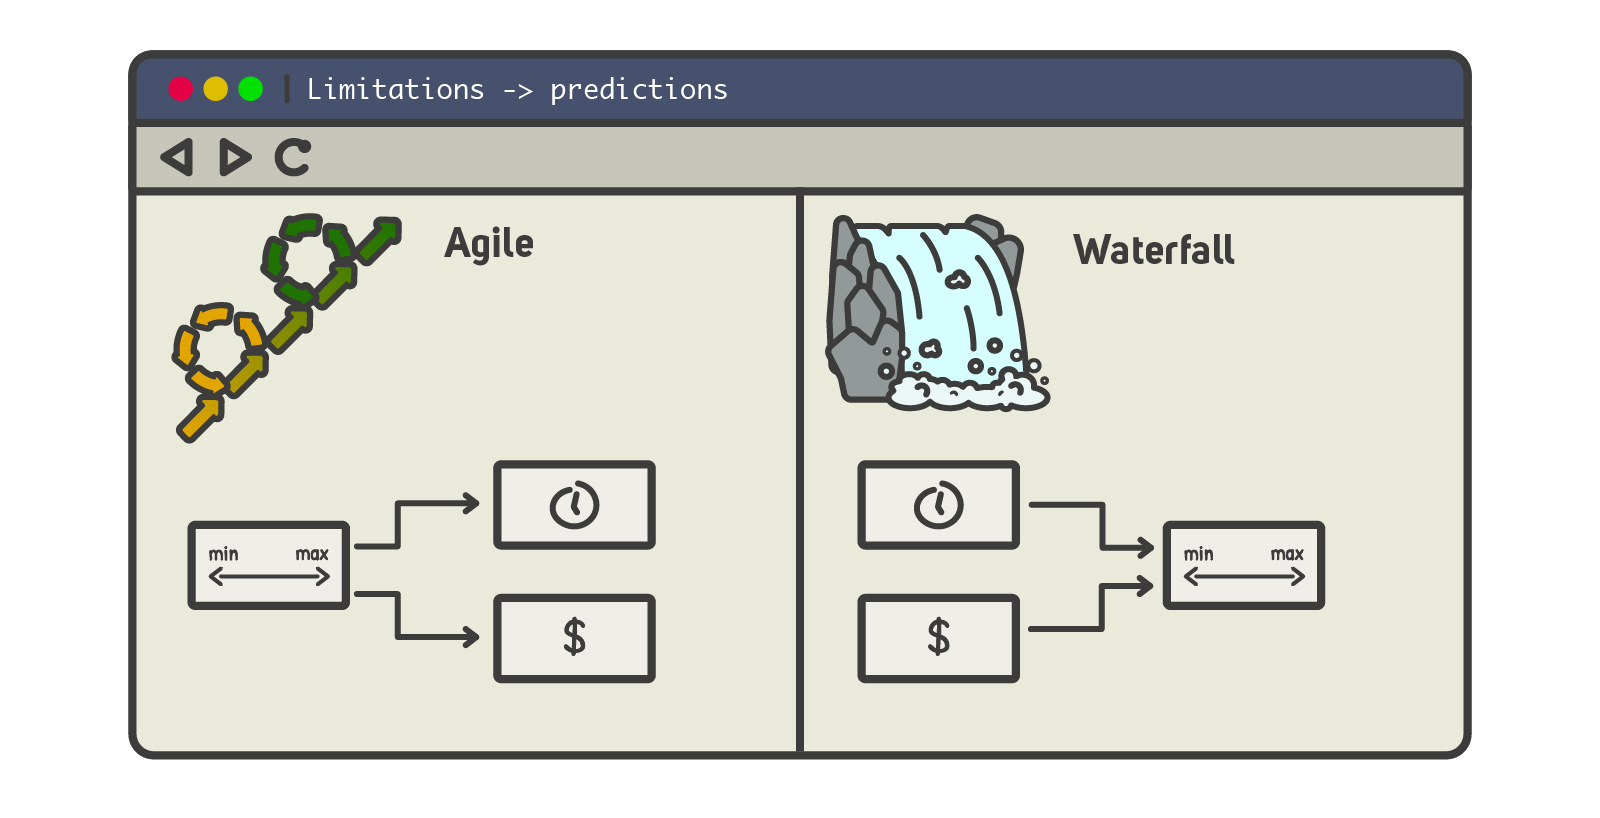 Limitations and predictions in agile vs waterfall model